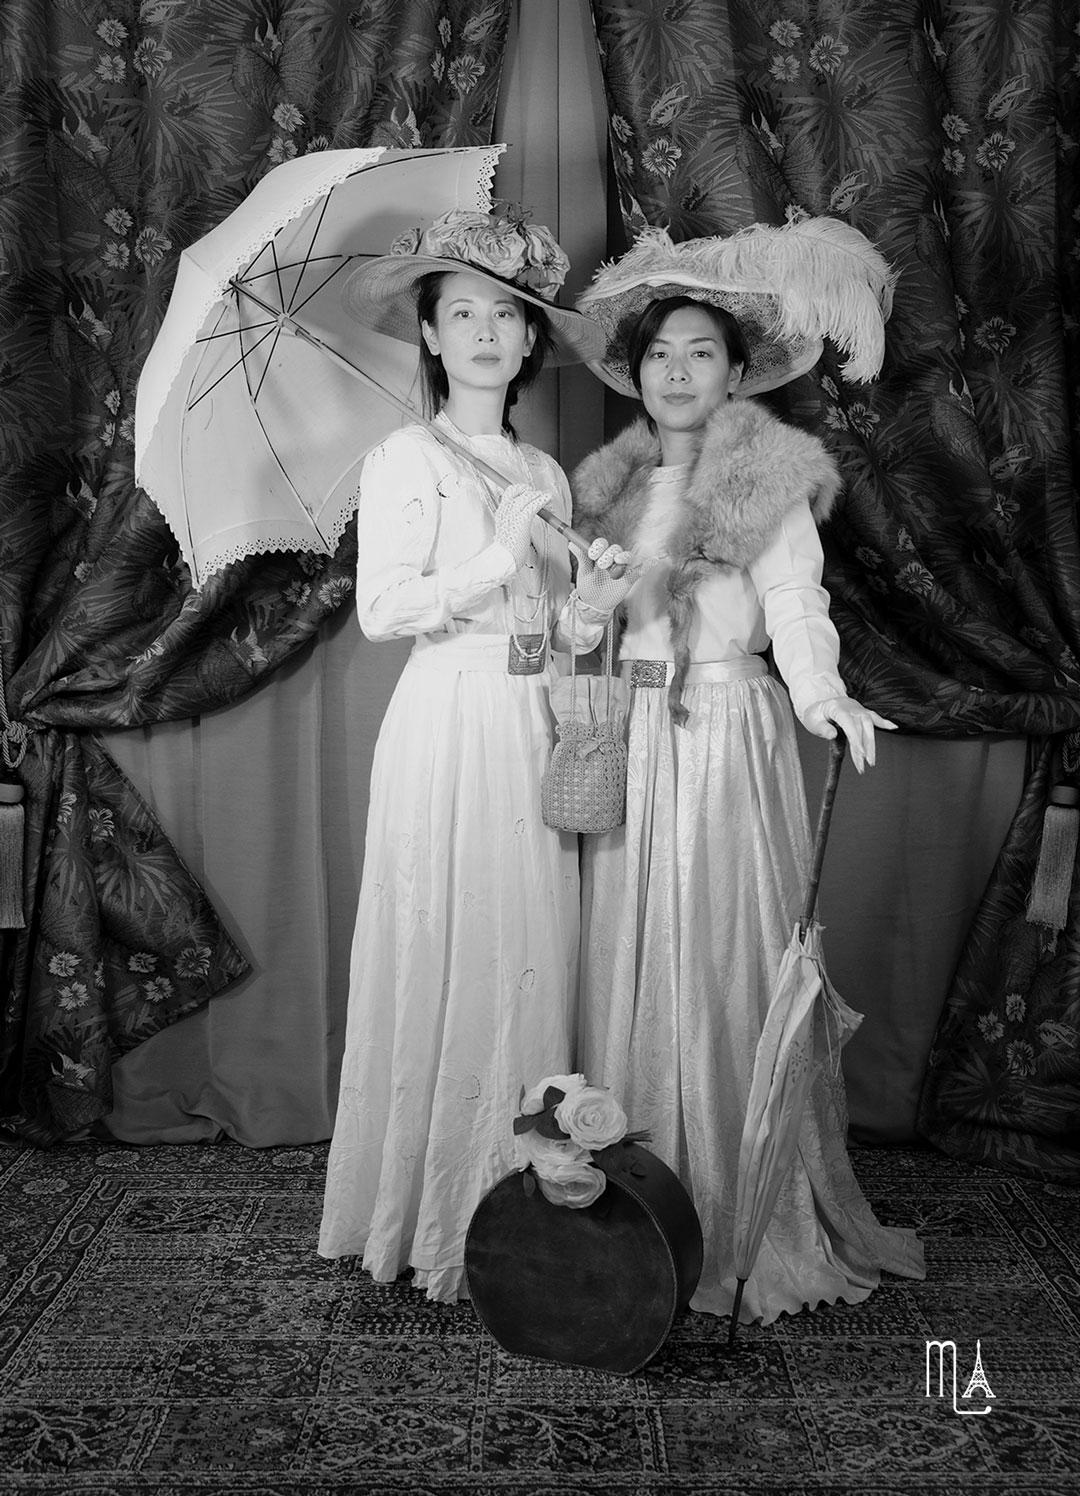 Retro 1900 photo sessions Portrait photo sessions in 1900 vintage outfits Belle Epoque fashion world's fair women travellers